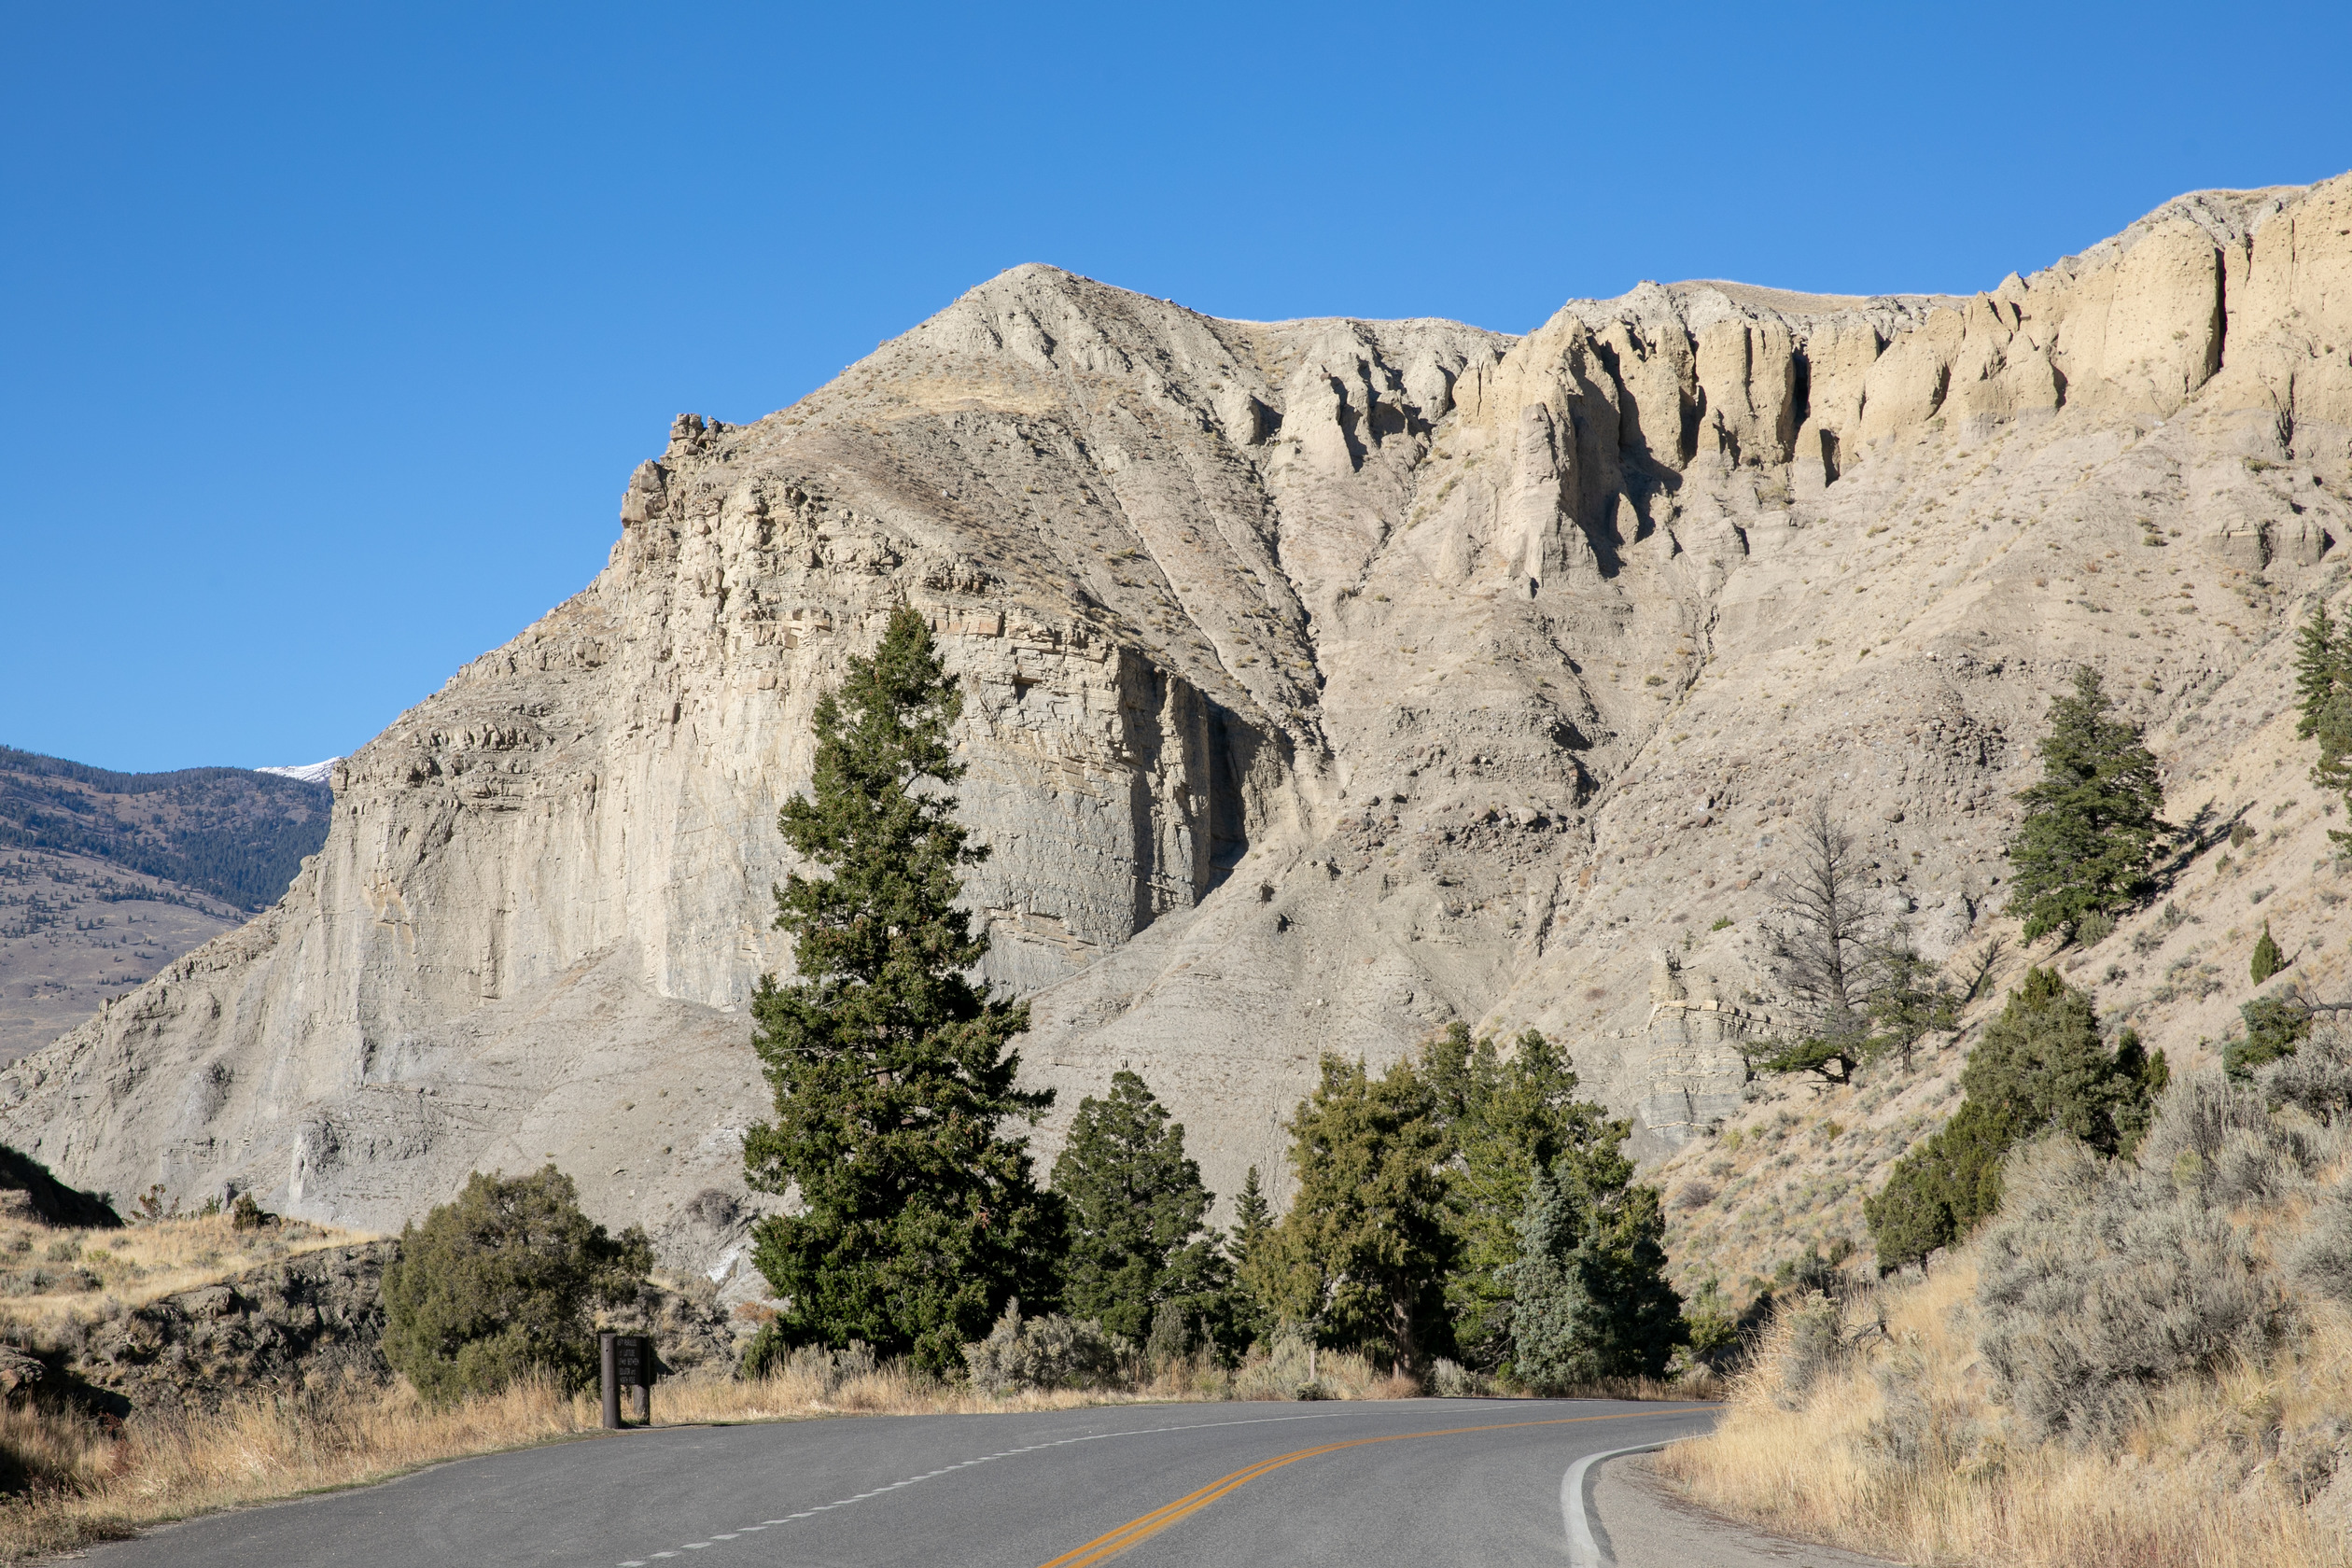 Looking from the road up to a cliff with horizontal layers of rock that has eroded into a few gullies